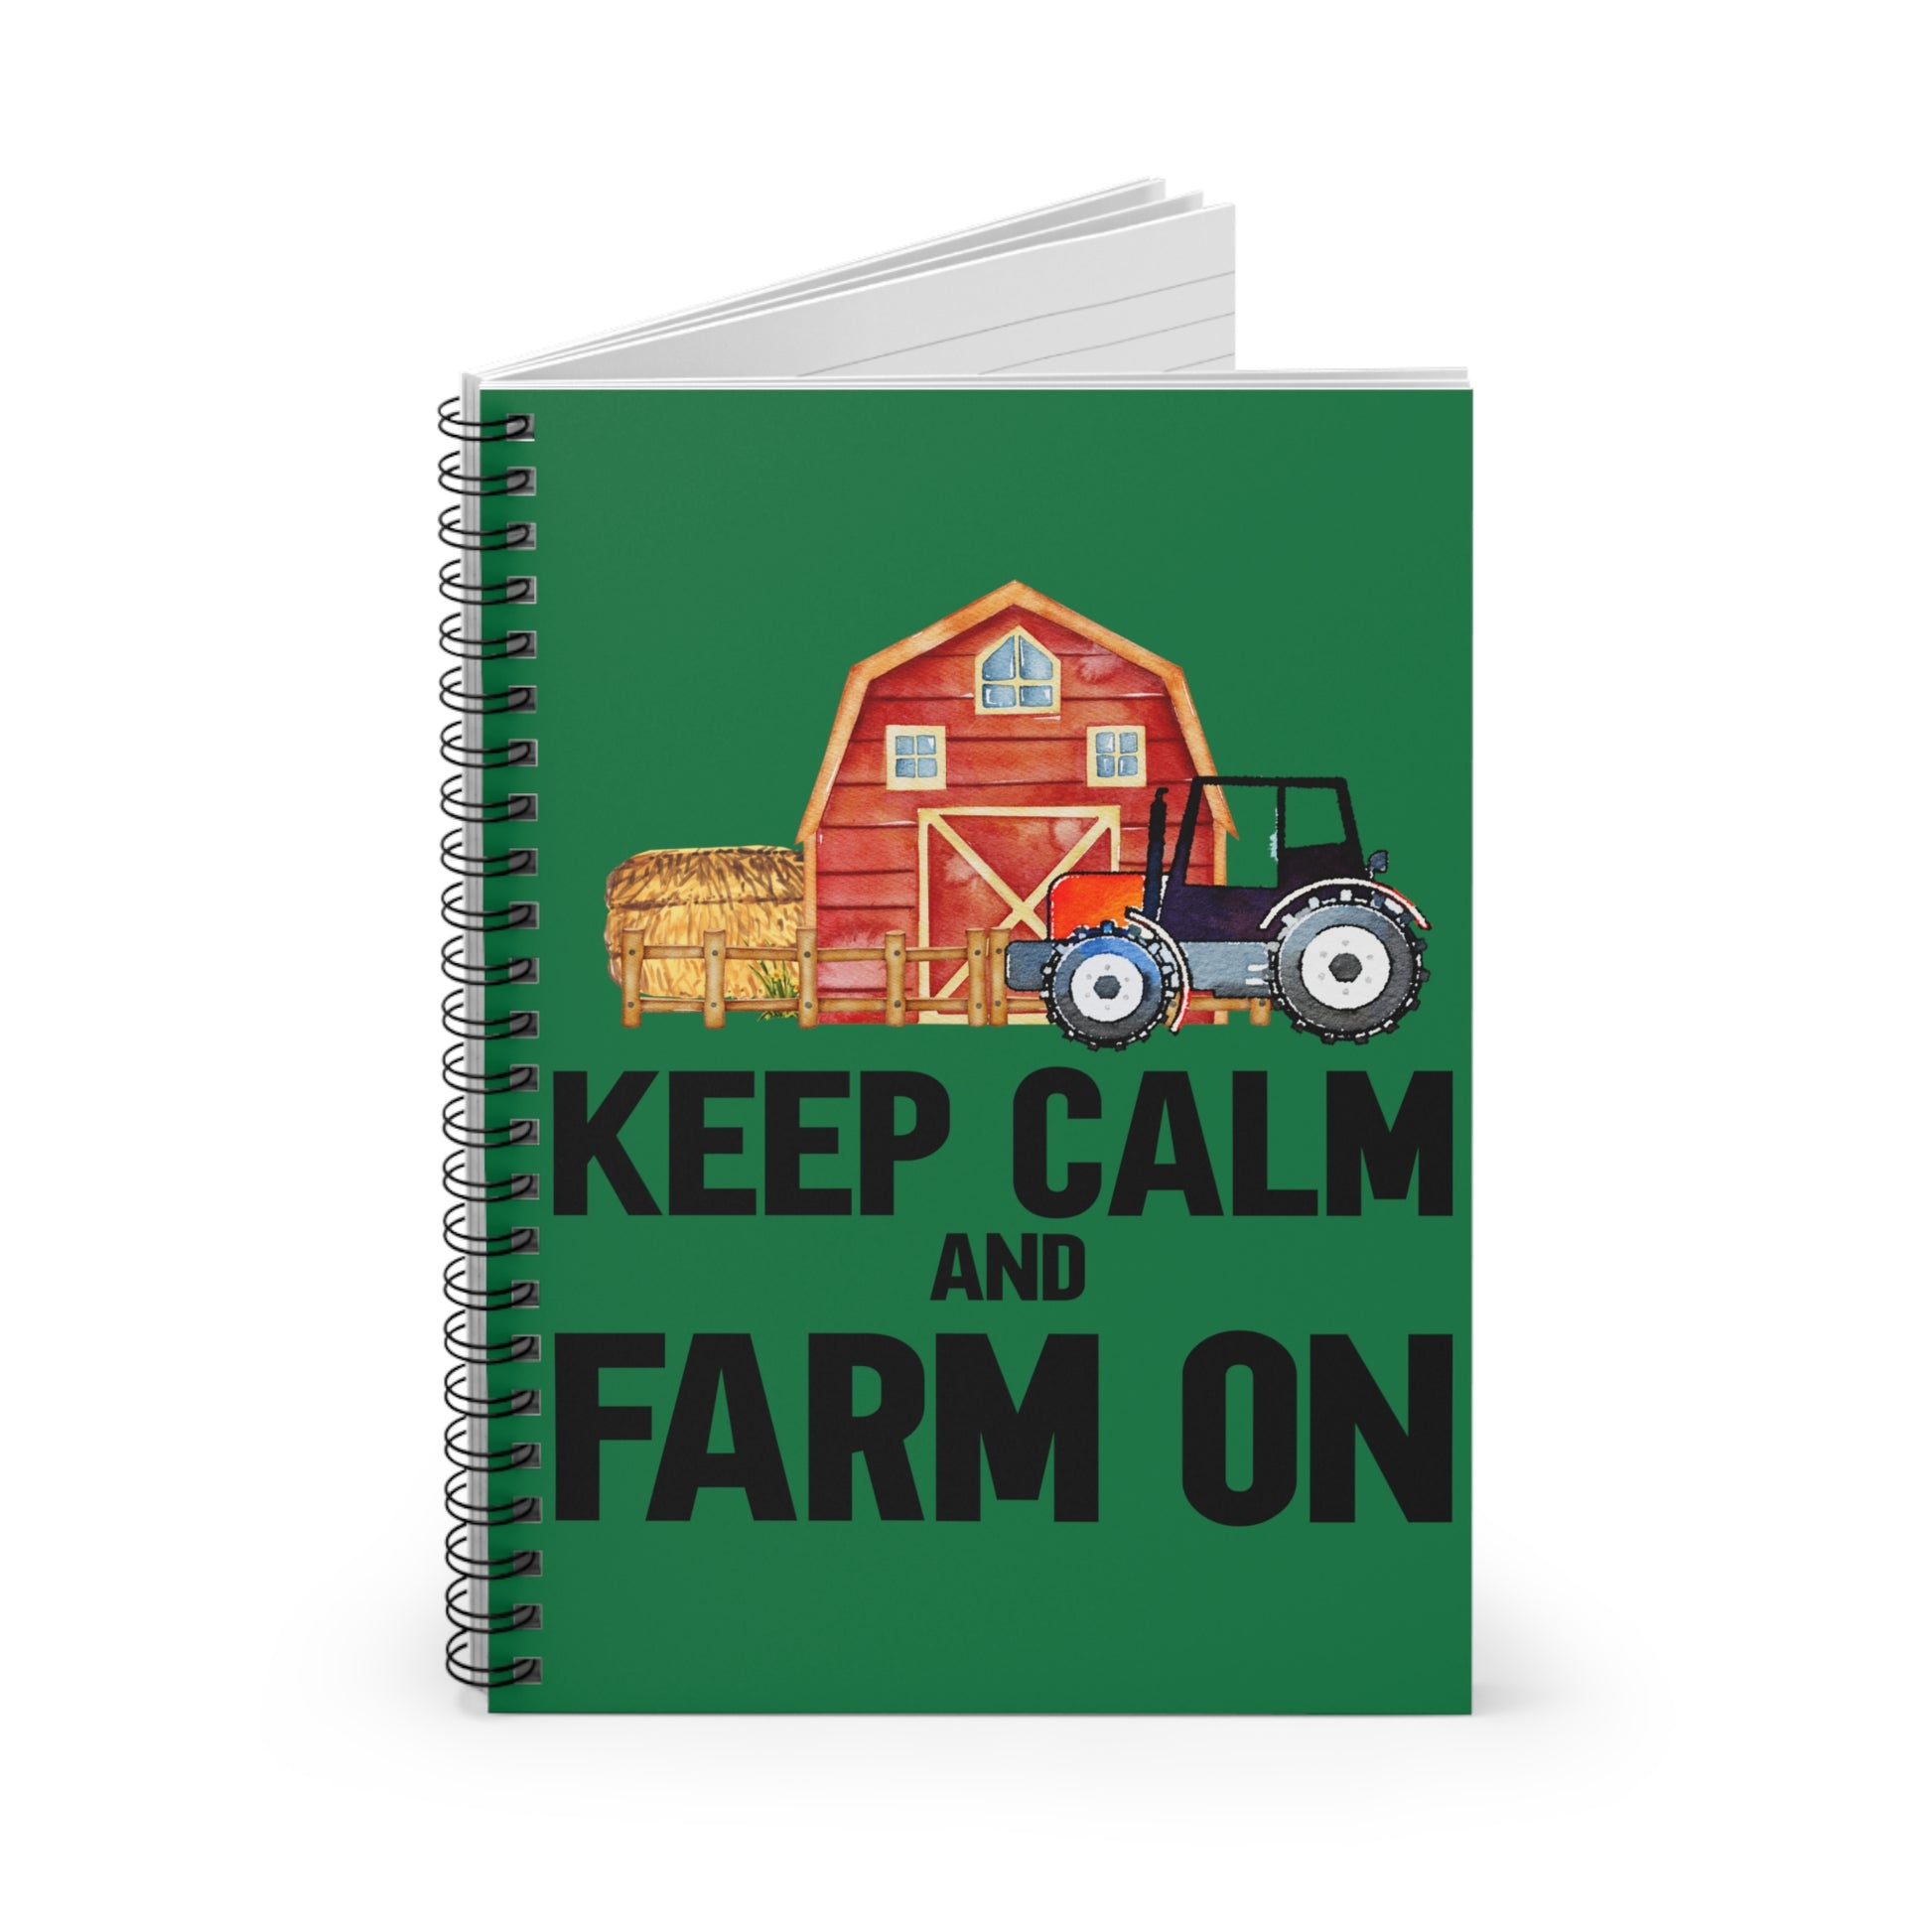 Keep Calm Farm On: Spiral Notebook - Log Books - Journals - Diaries - and More Custom Printed by TheGlassyLass